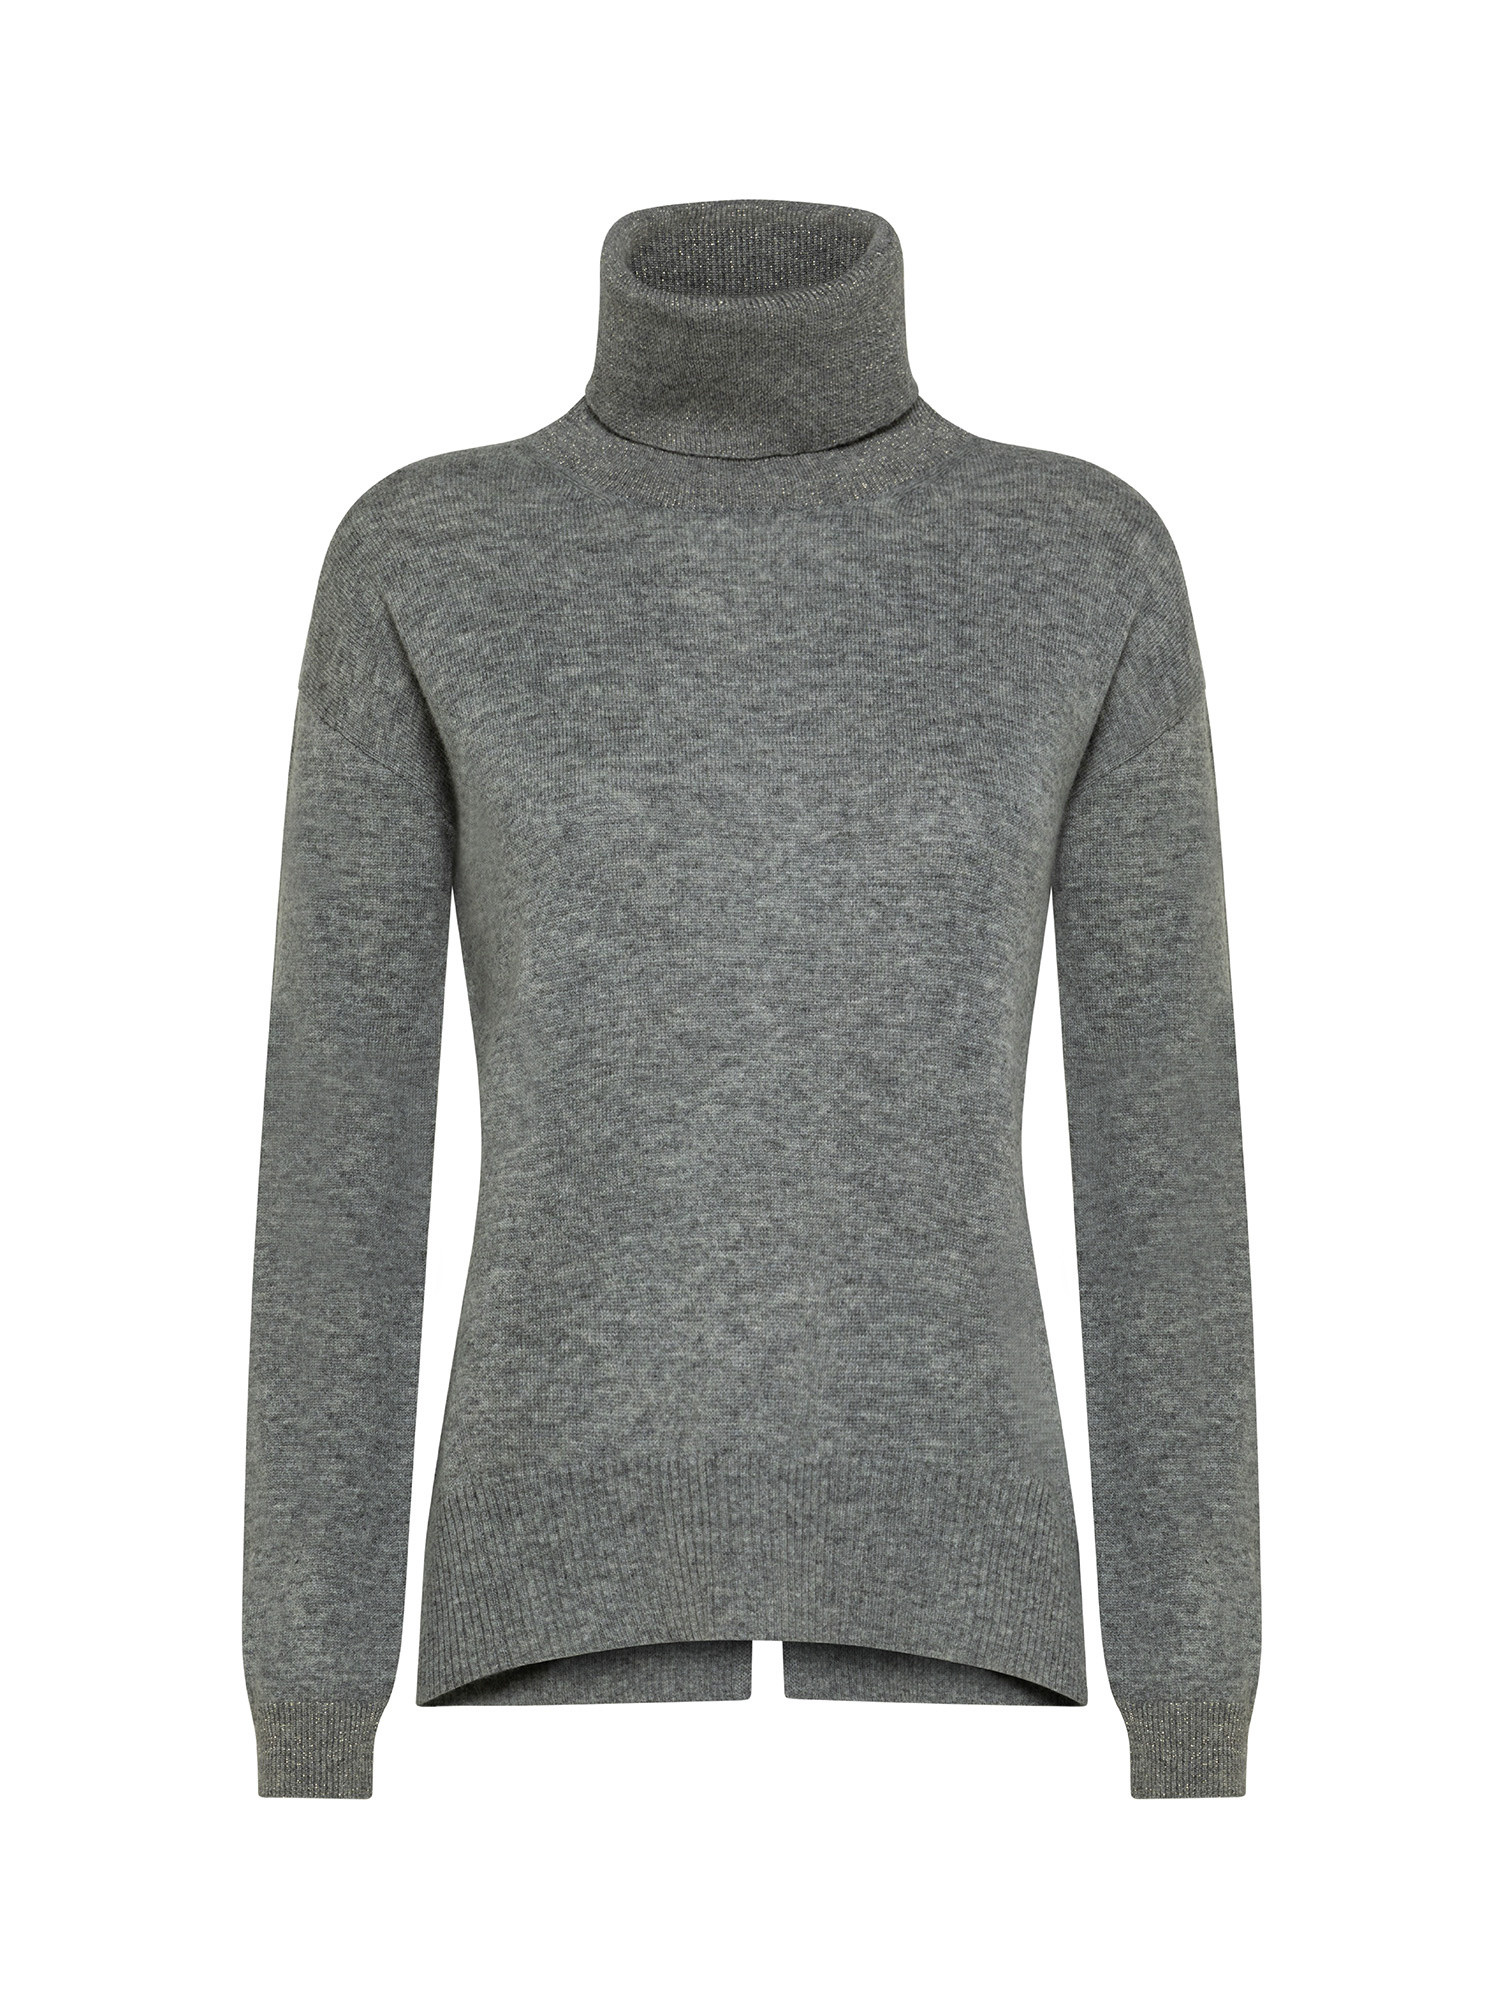 Koan - Wool and cashmere turtleneck pullover, Grey, large image number 0